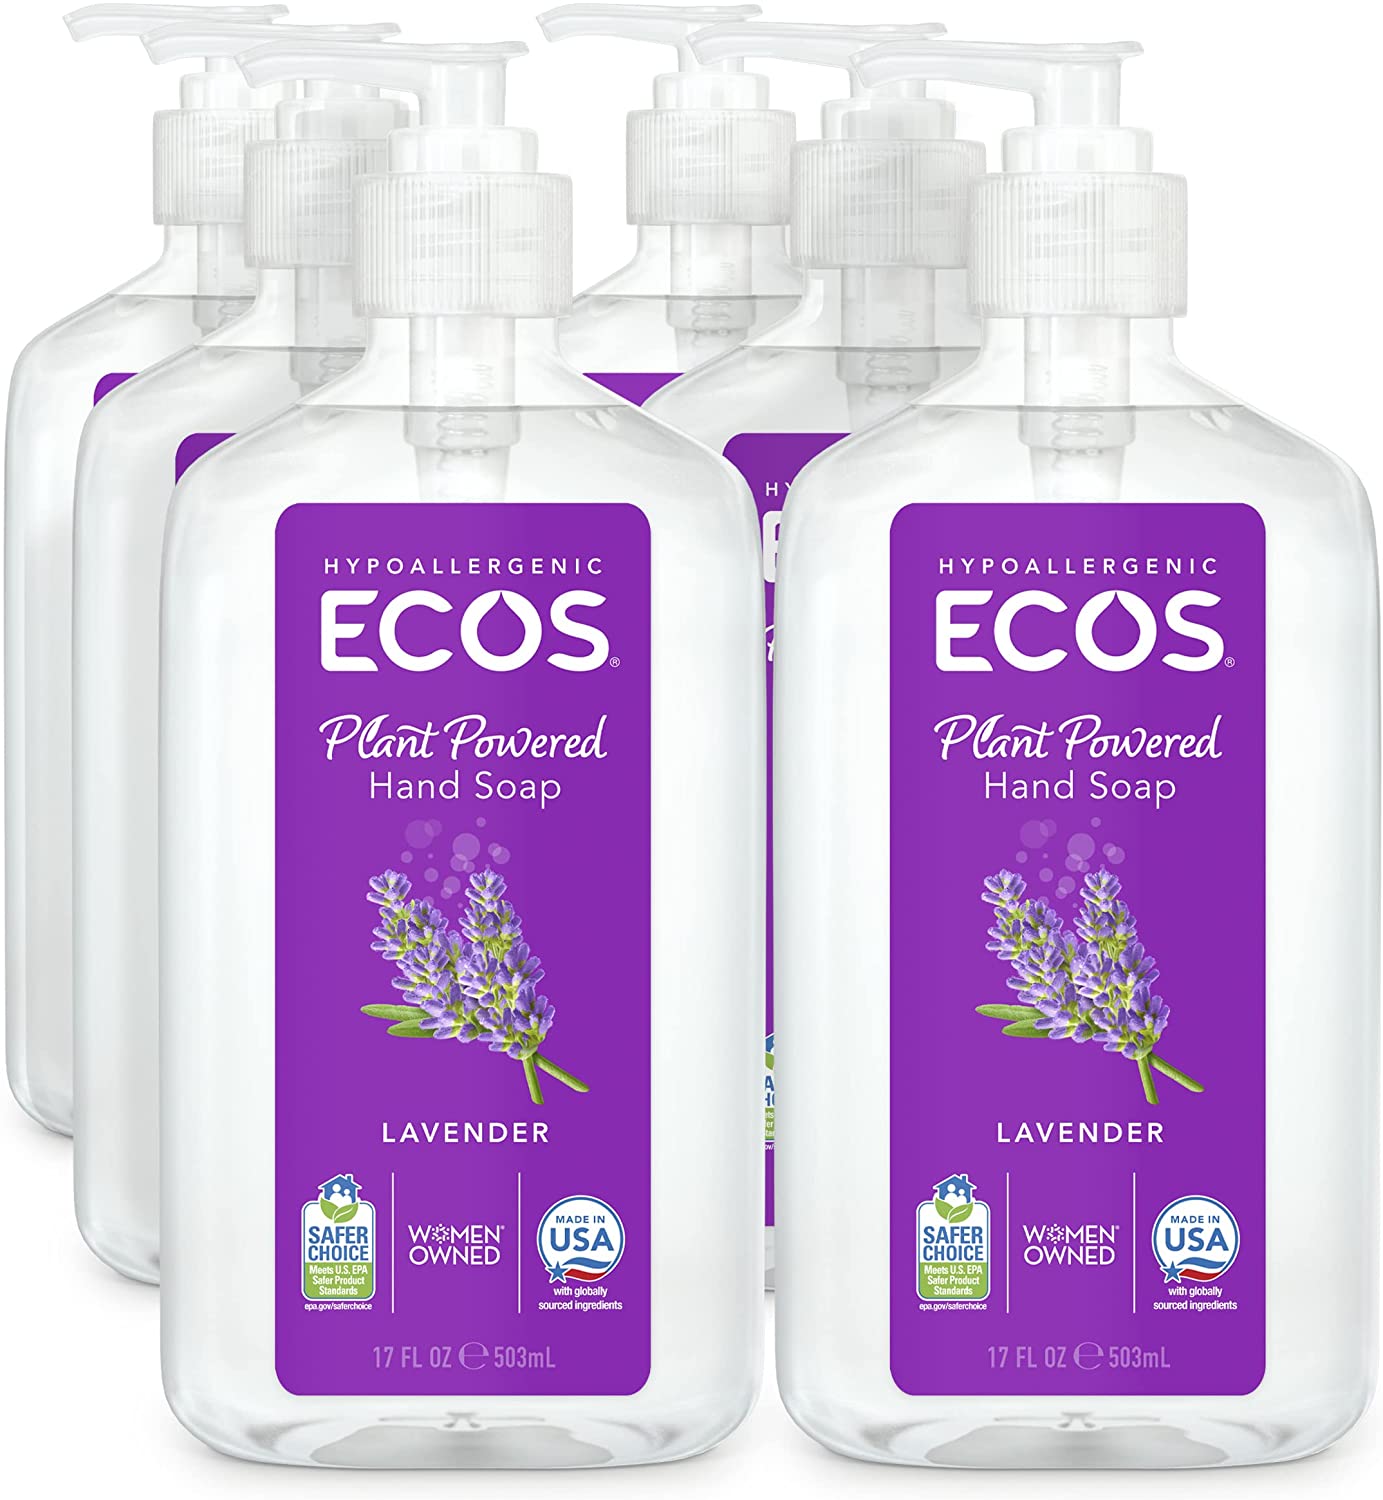 ECOS Biodegradable Natural Hand Soap, 6-Pack